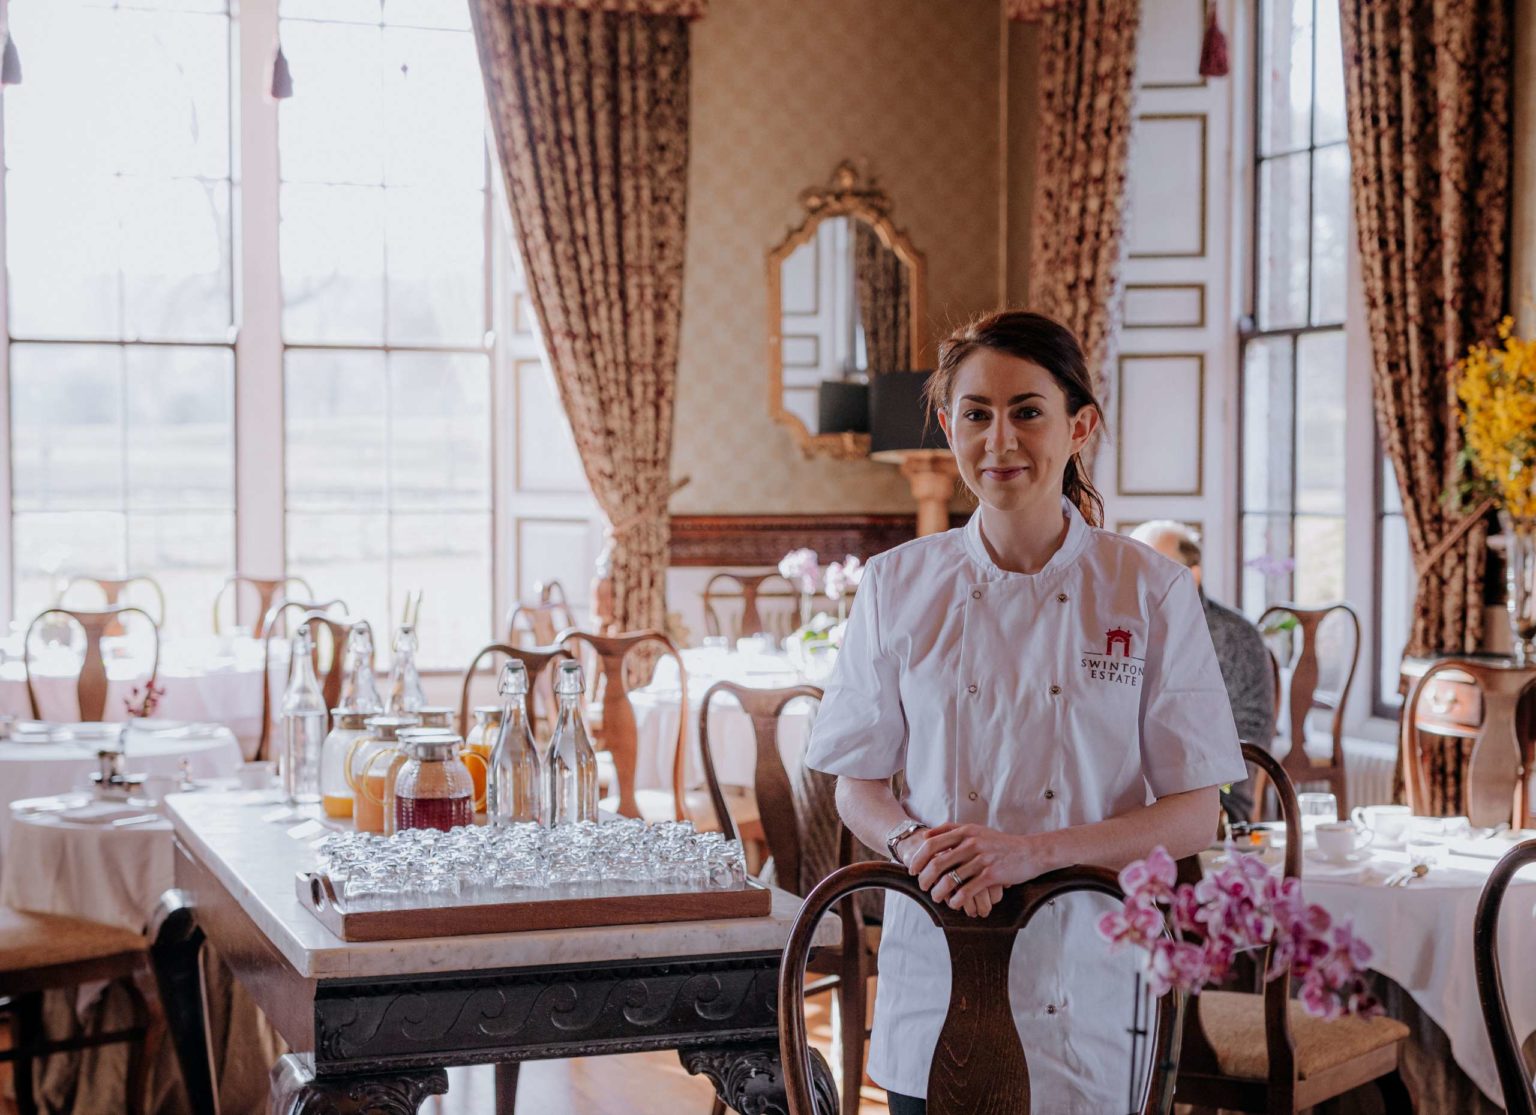 Chef Ruth Hansom standing among the tables and chairs in the fine dining Samuel's Restaurant on the Swinton Estate in North Yorkshire